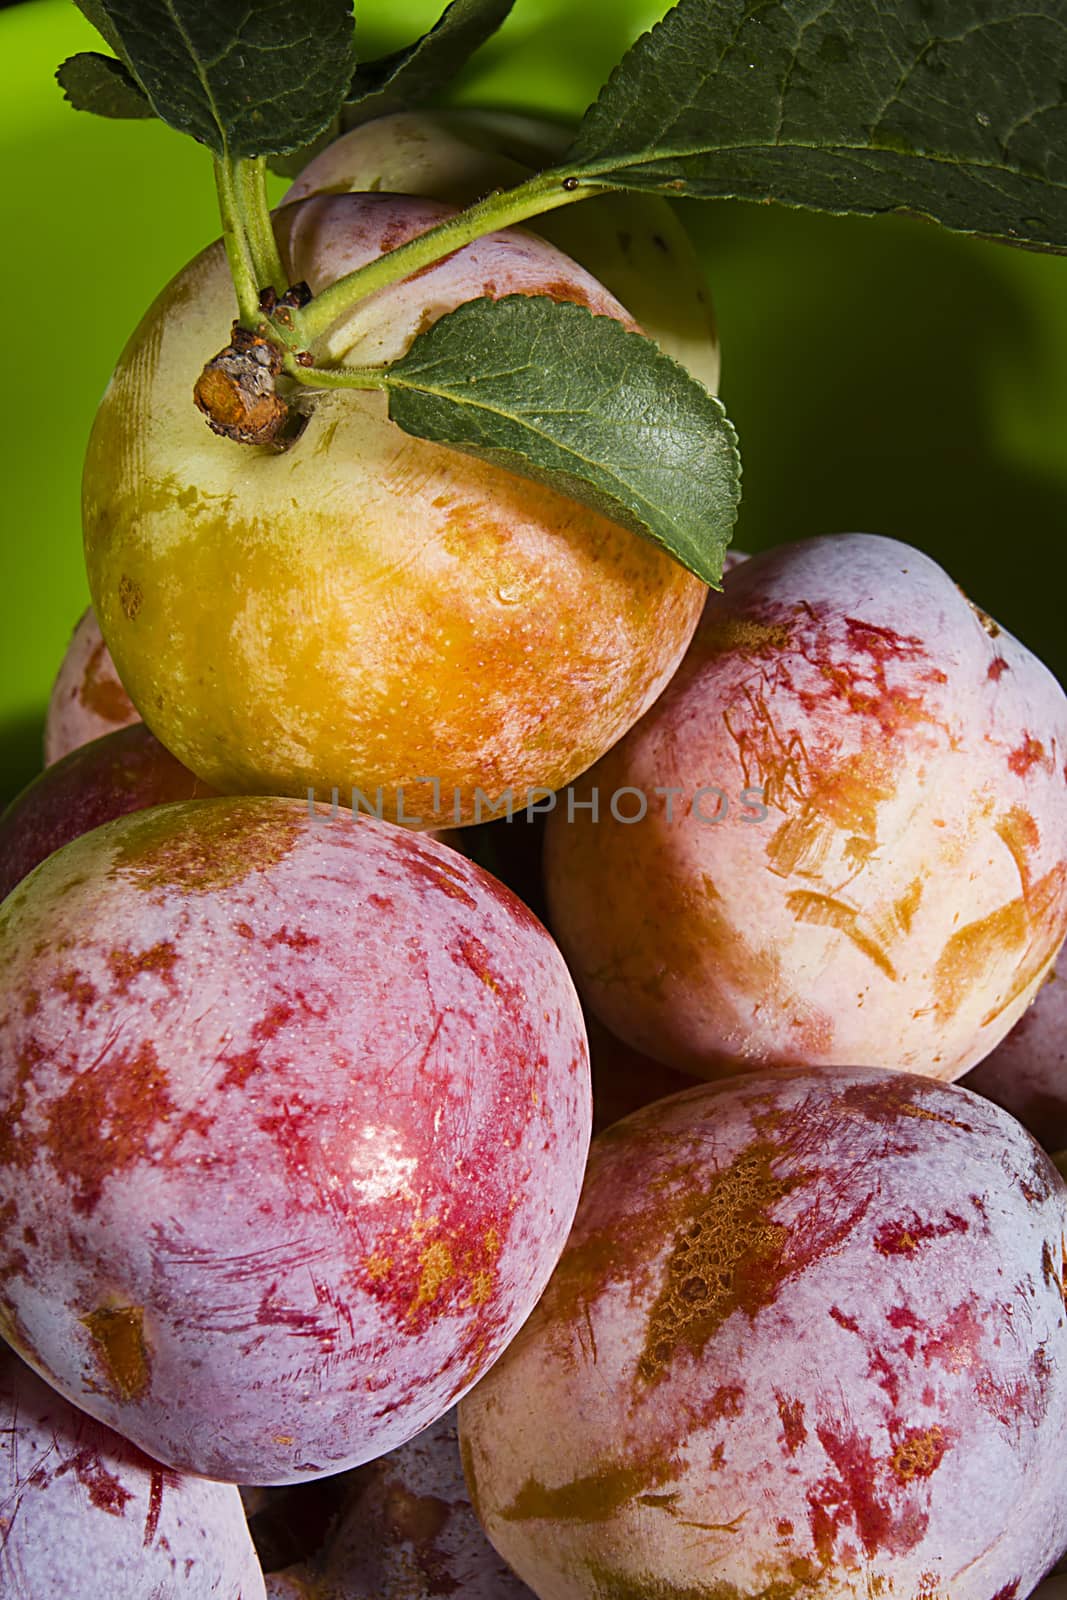 Many ripe plums on a green background